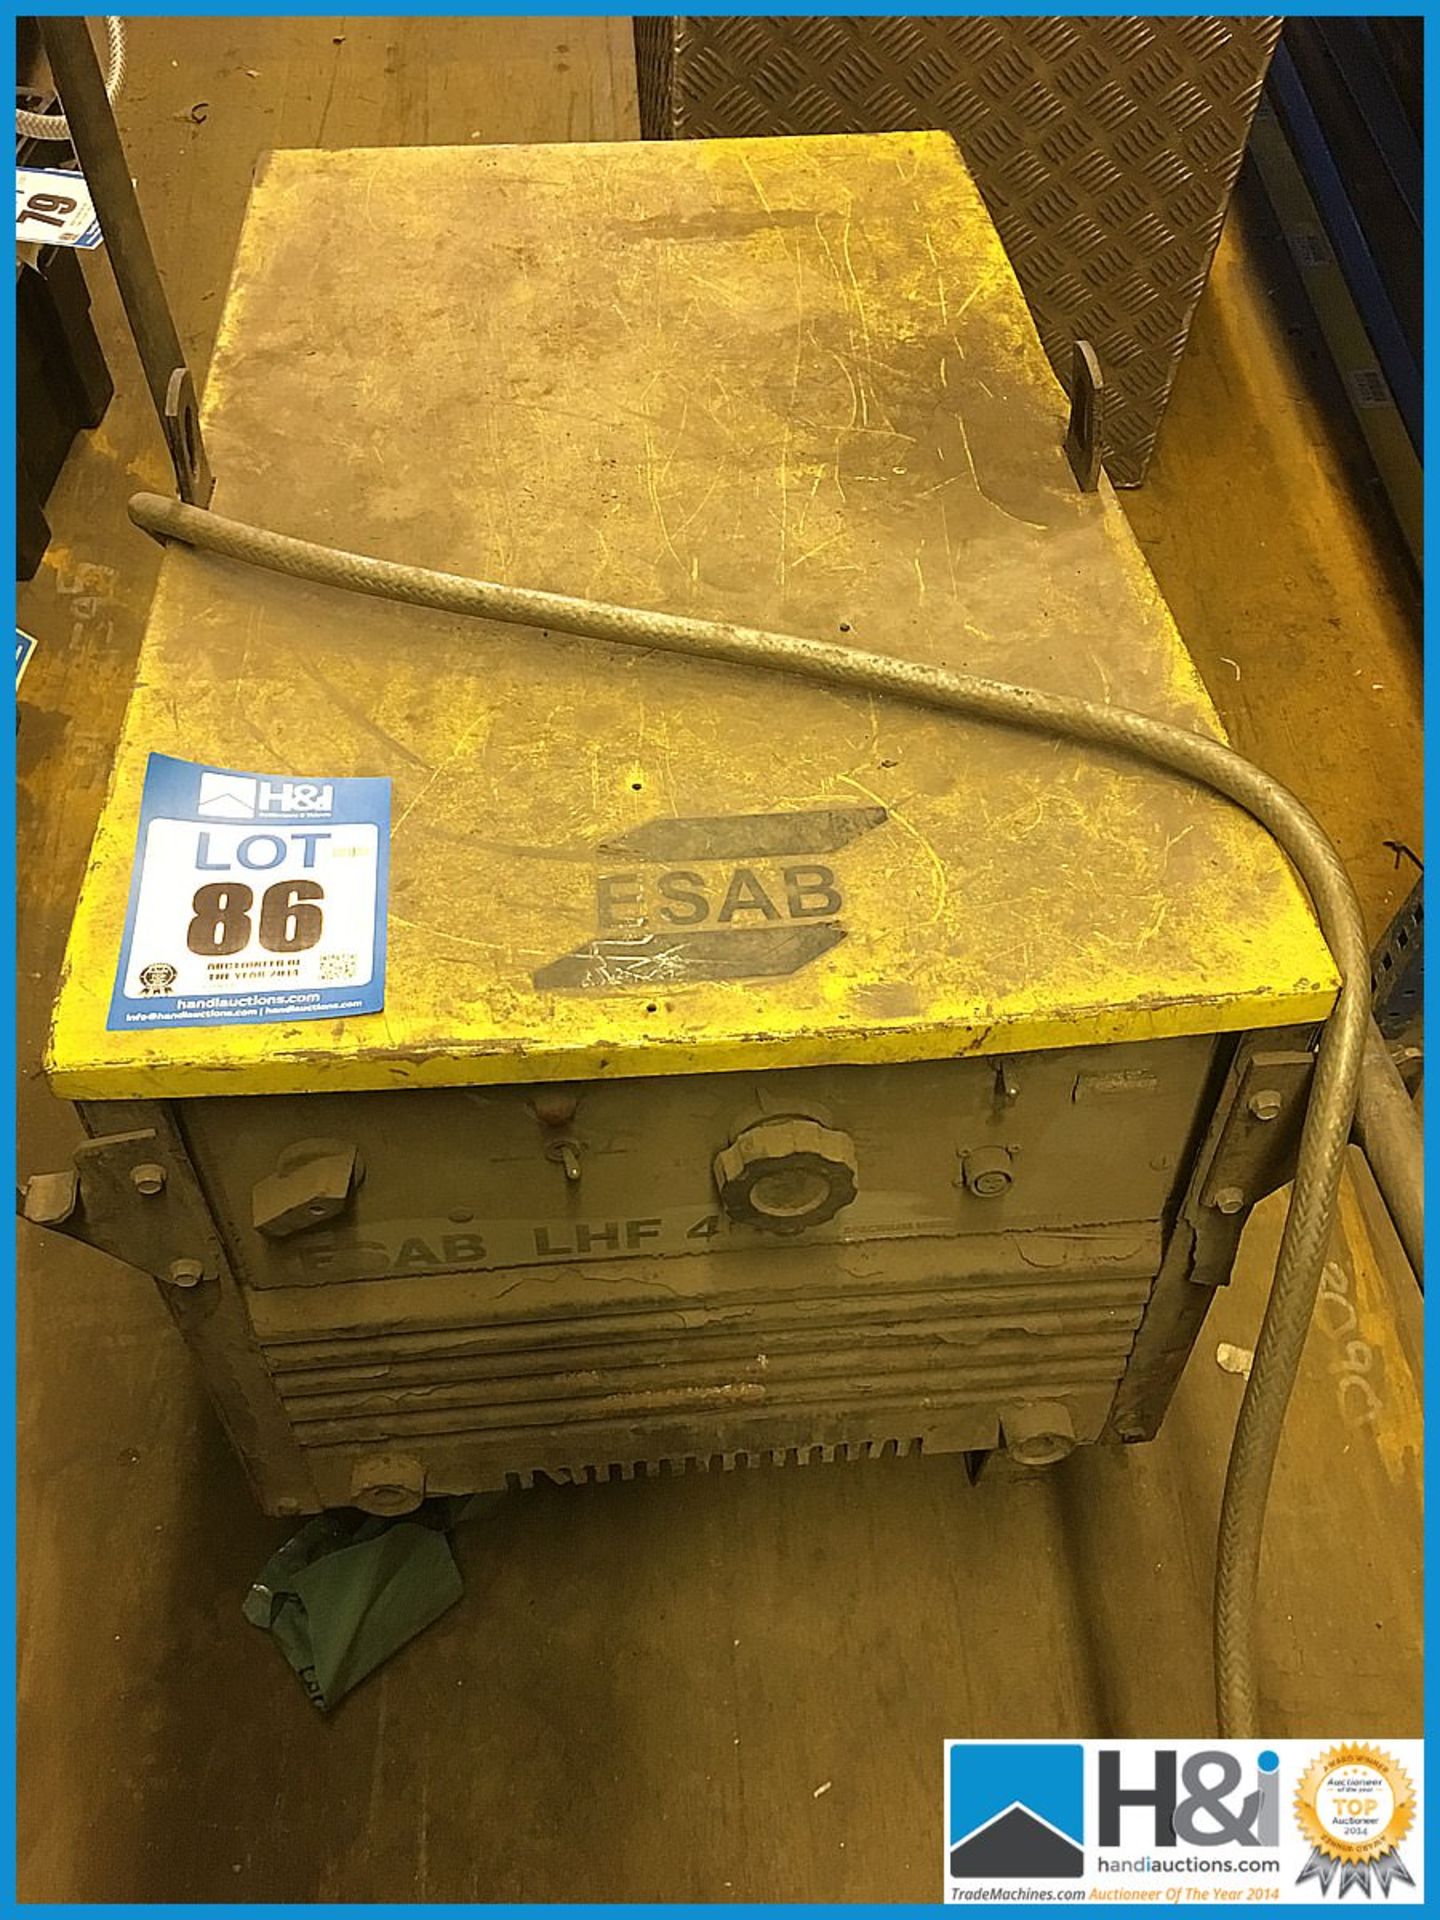 Esab lhf 400 portable arc welder. No VAT on this lot except on the buyers premium Appraisal: Viewing - Image 2 of 2